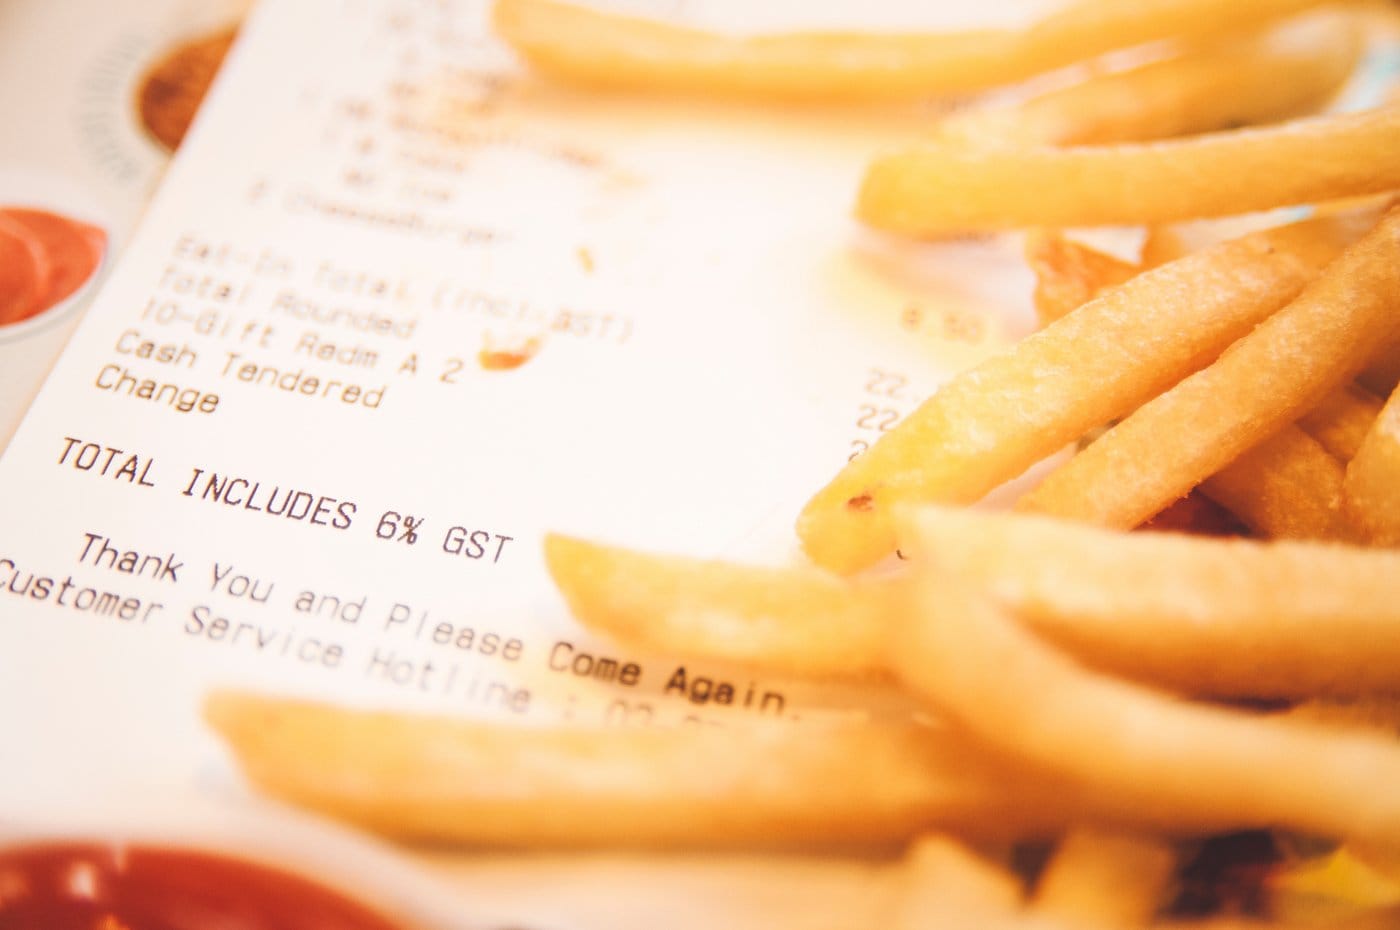 French fries on thermal paper receipt